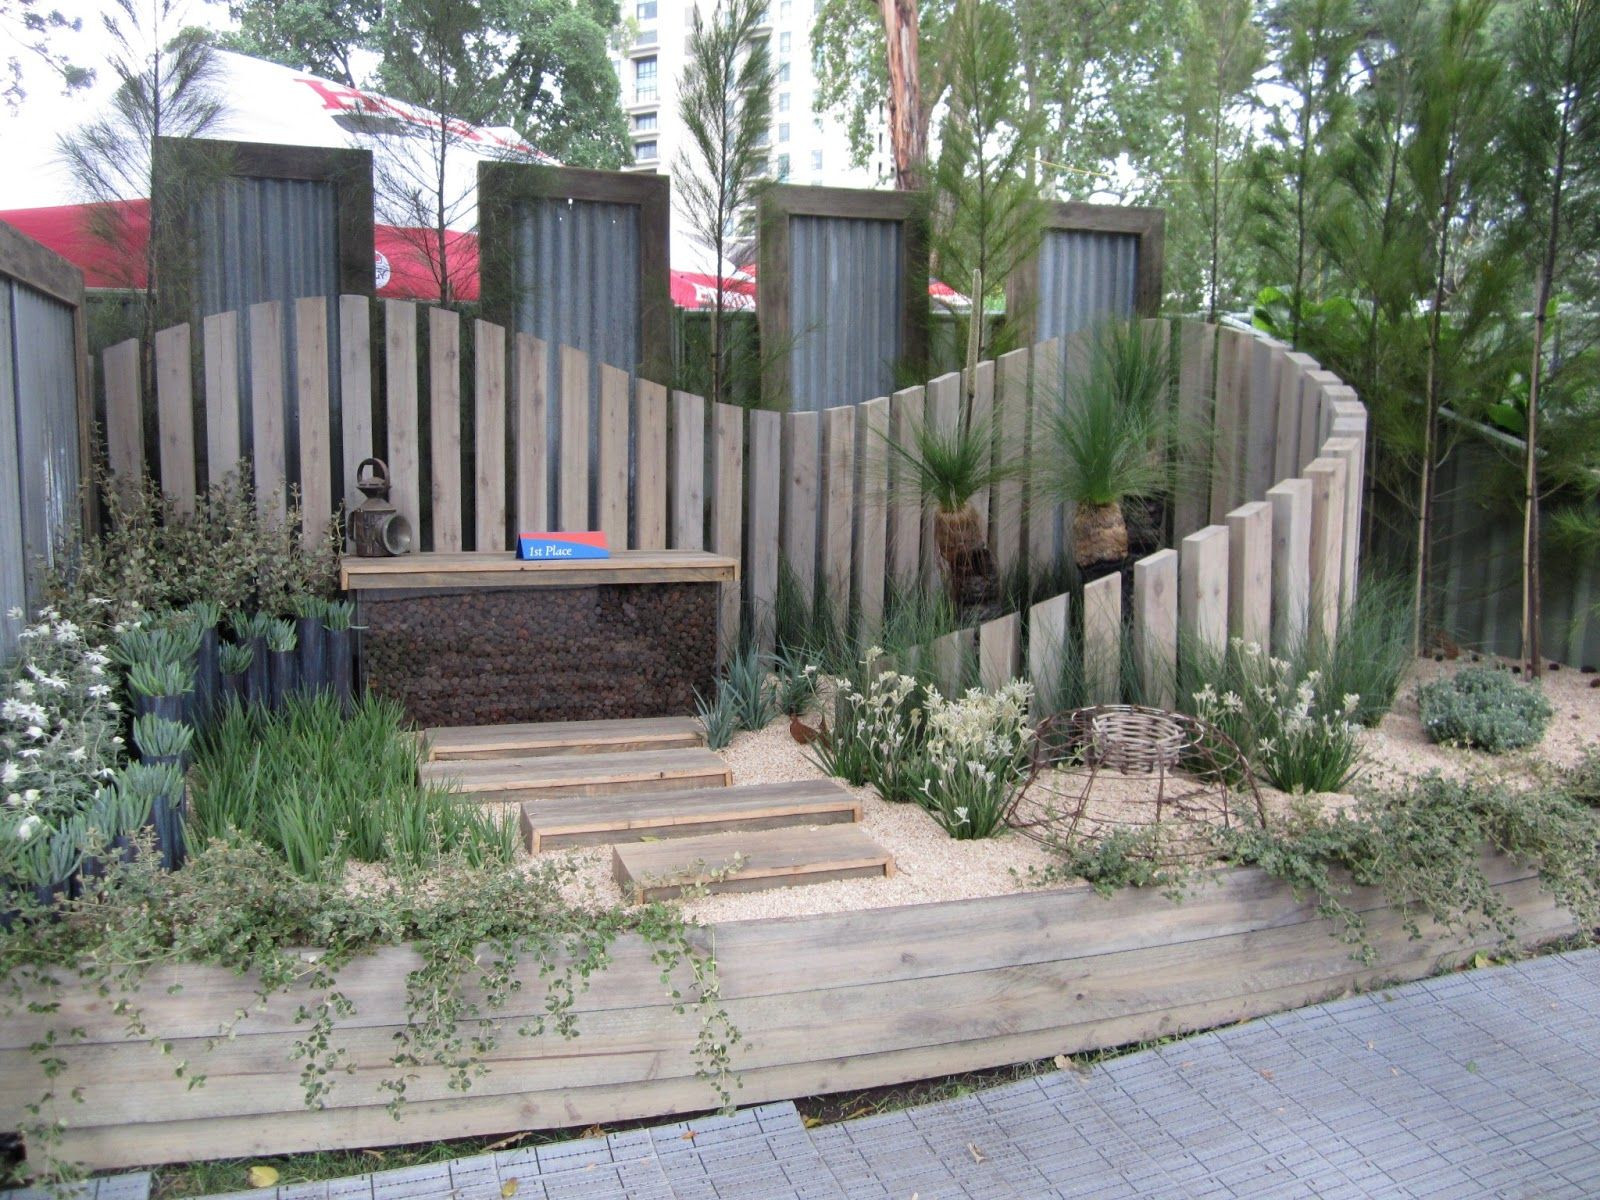 Landscape Timber Fence
 Timber fence screen of varying height and organic shape